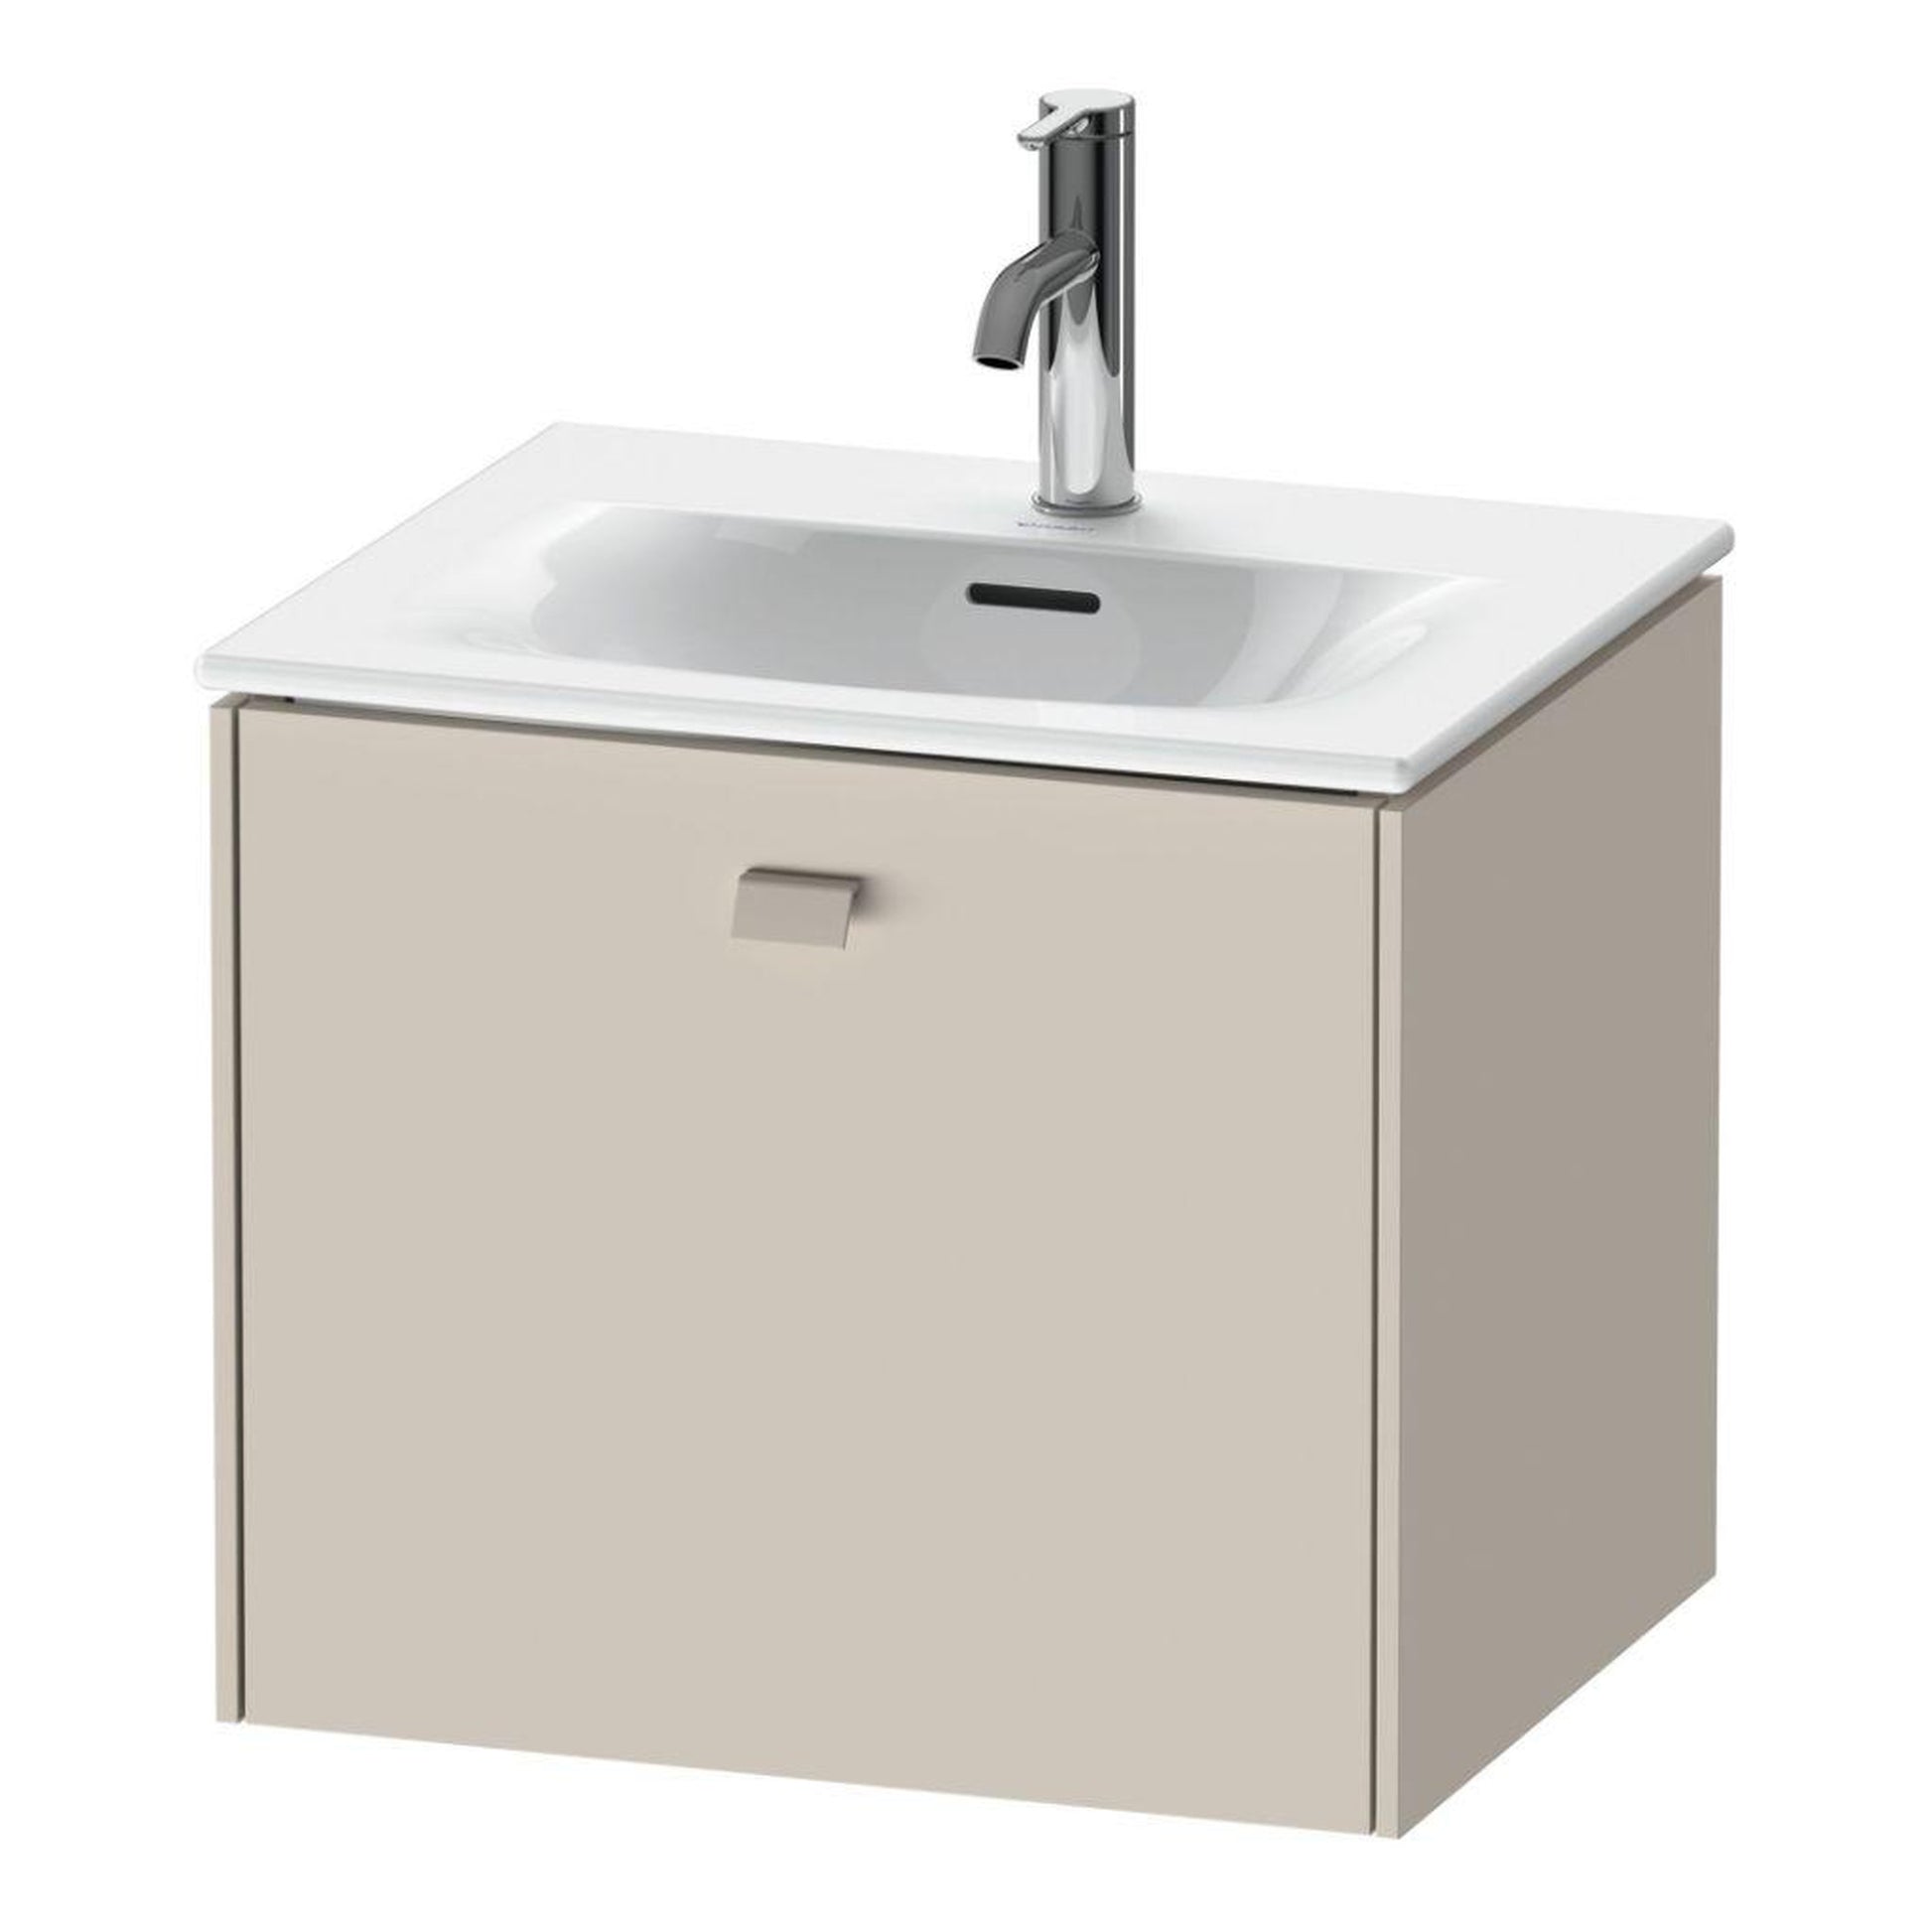 Duravit Brioso BR42090 20" x 17" x 16" One Drawer Wall-Mount Vanity Unit in Taupe